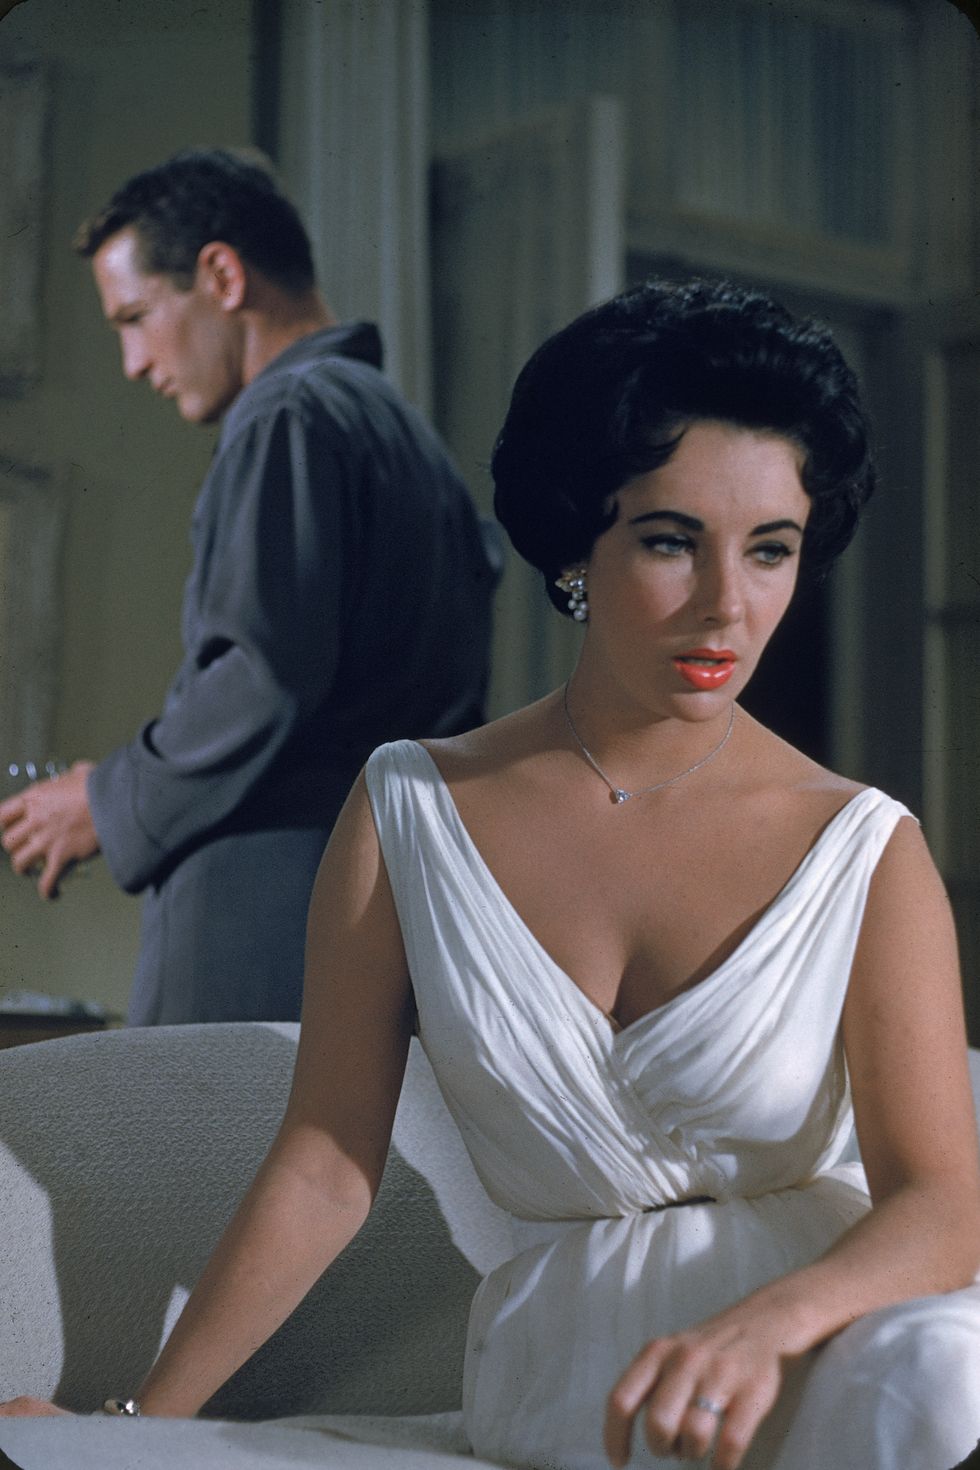 7 of the Most Iconic Necklaces in Movie History